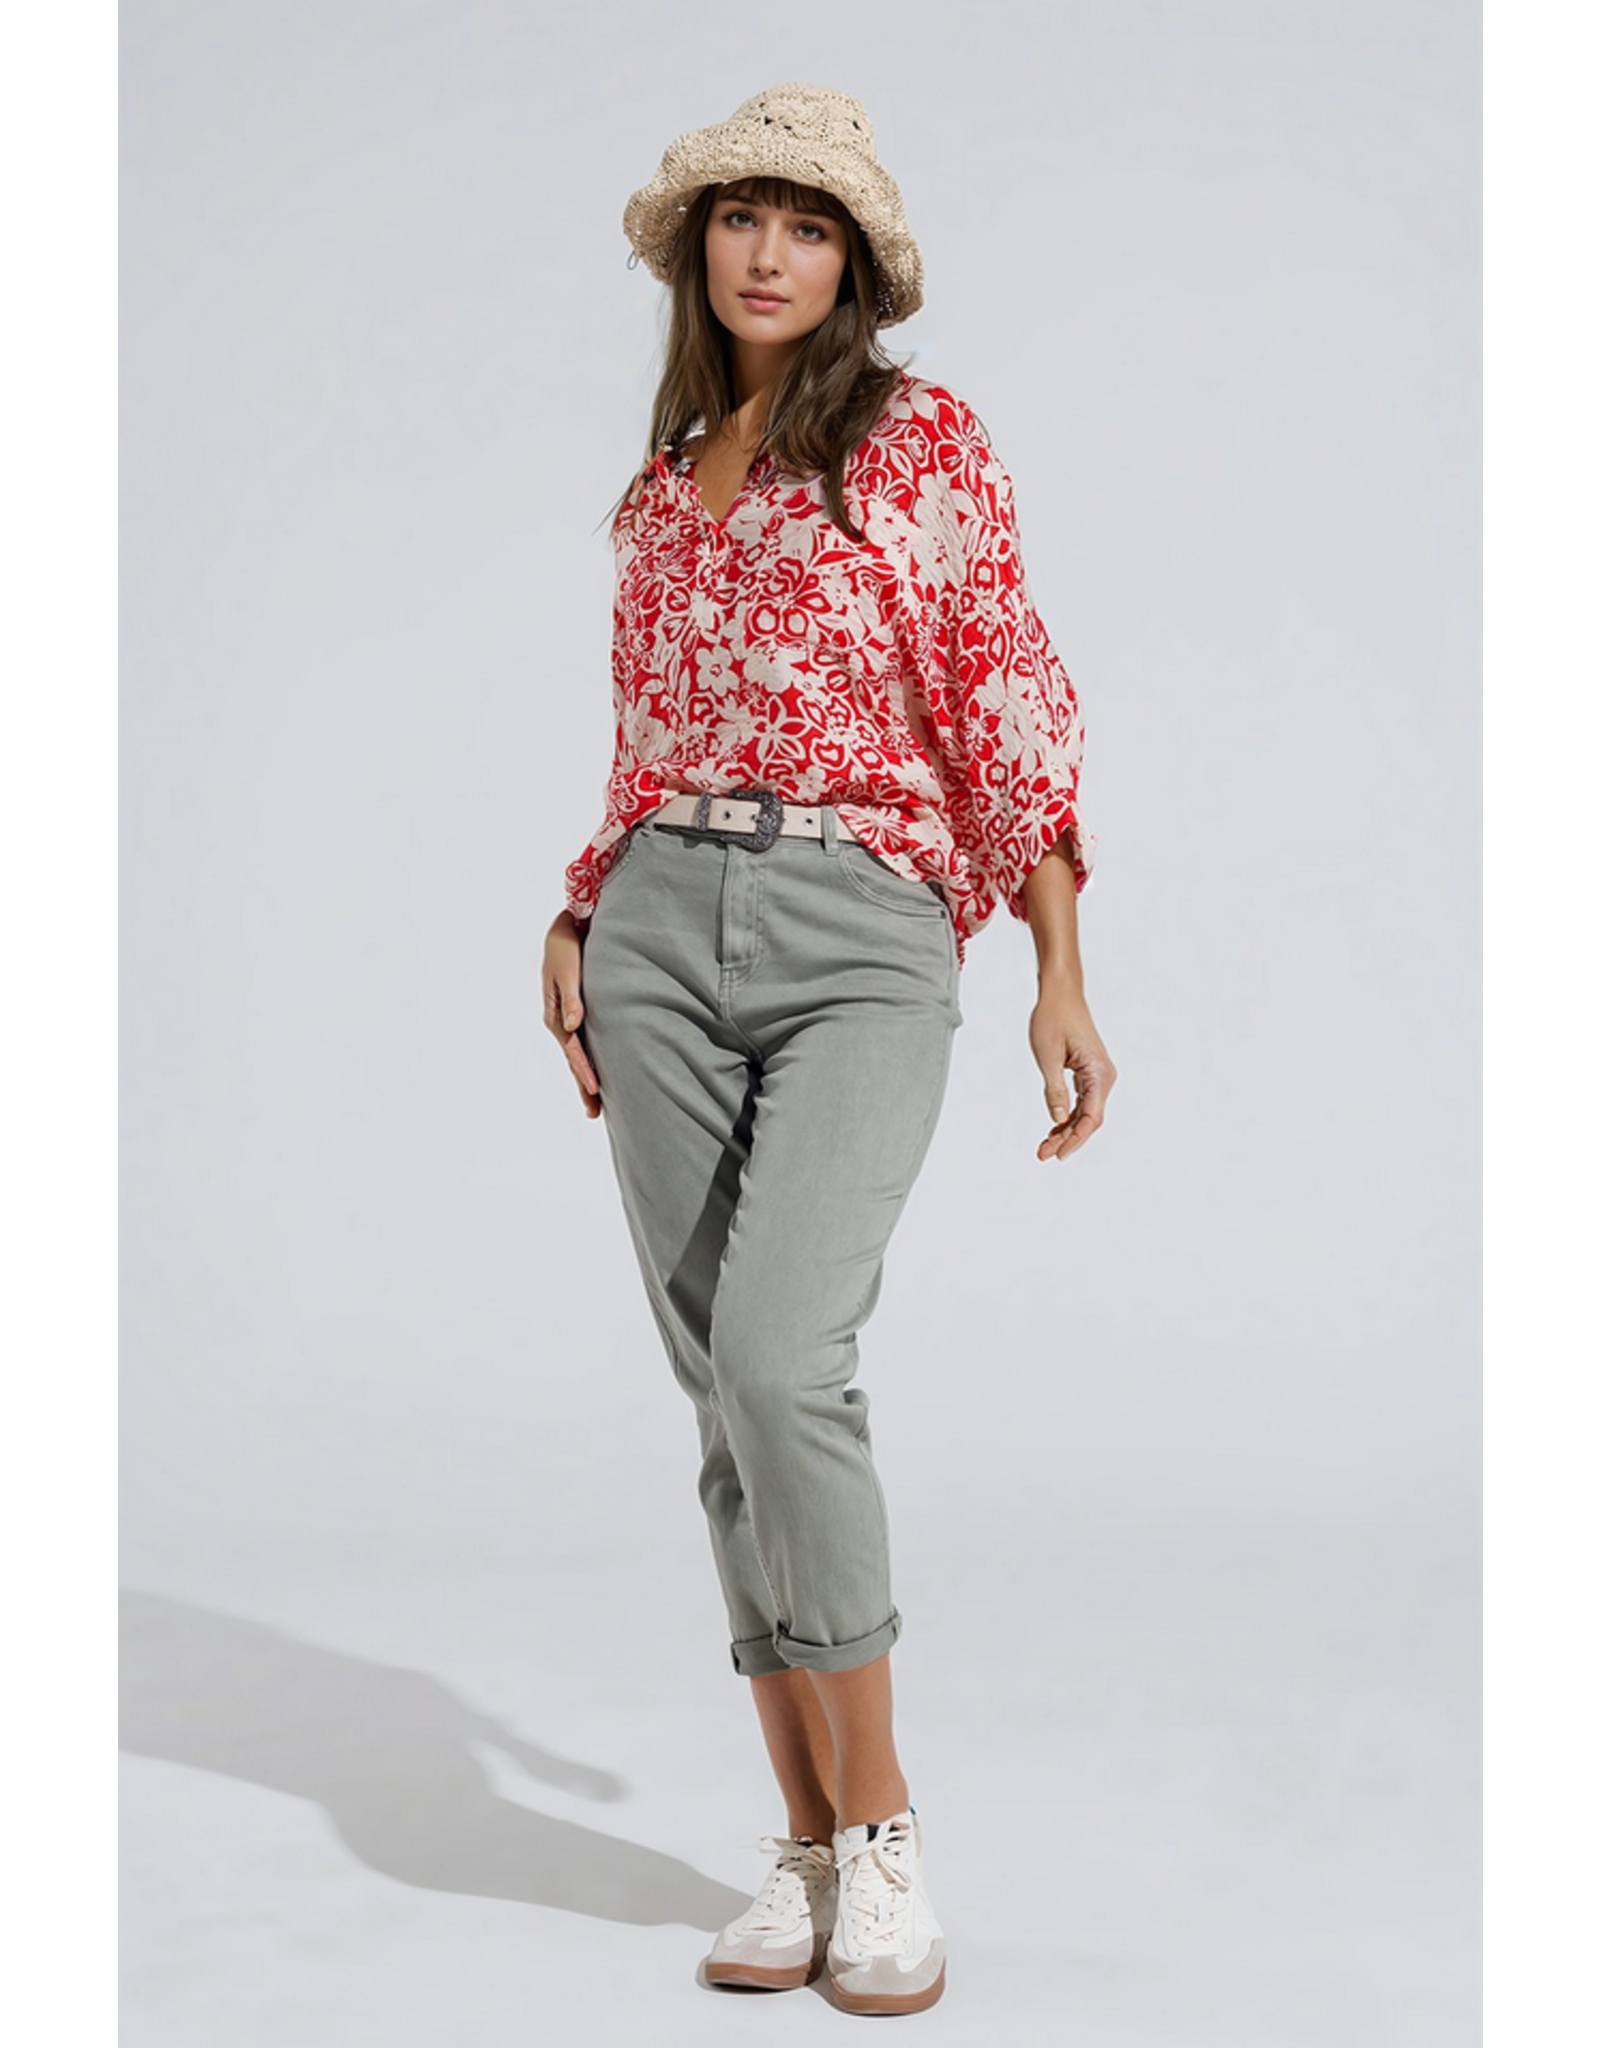 Q2 Relaxed Red Floral Blouse with Bell Sleeves